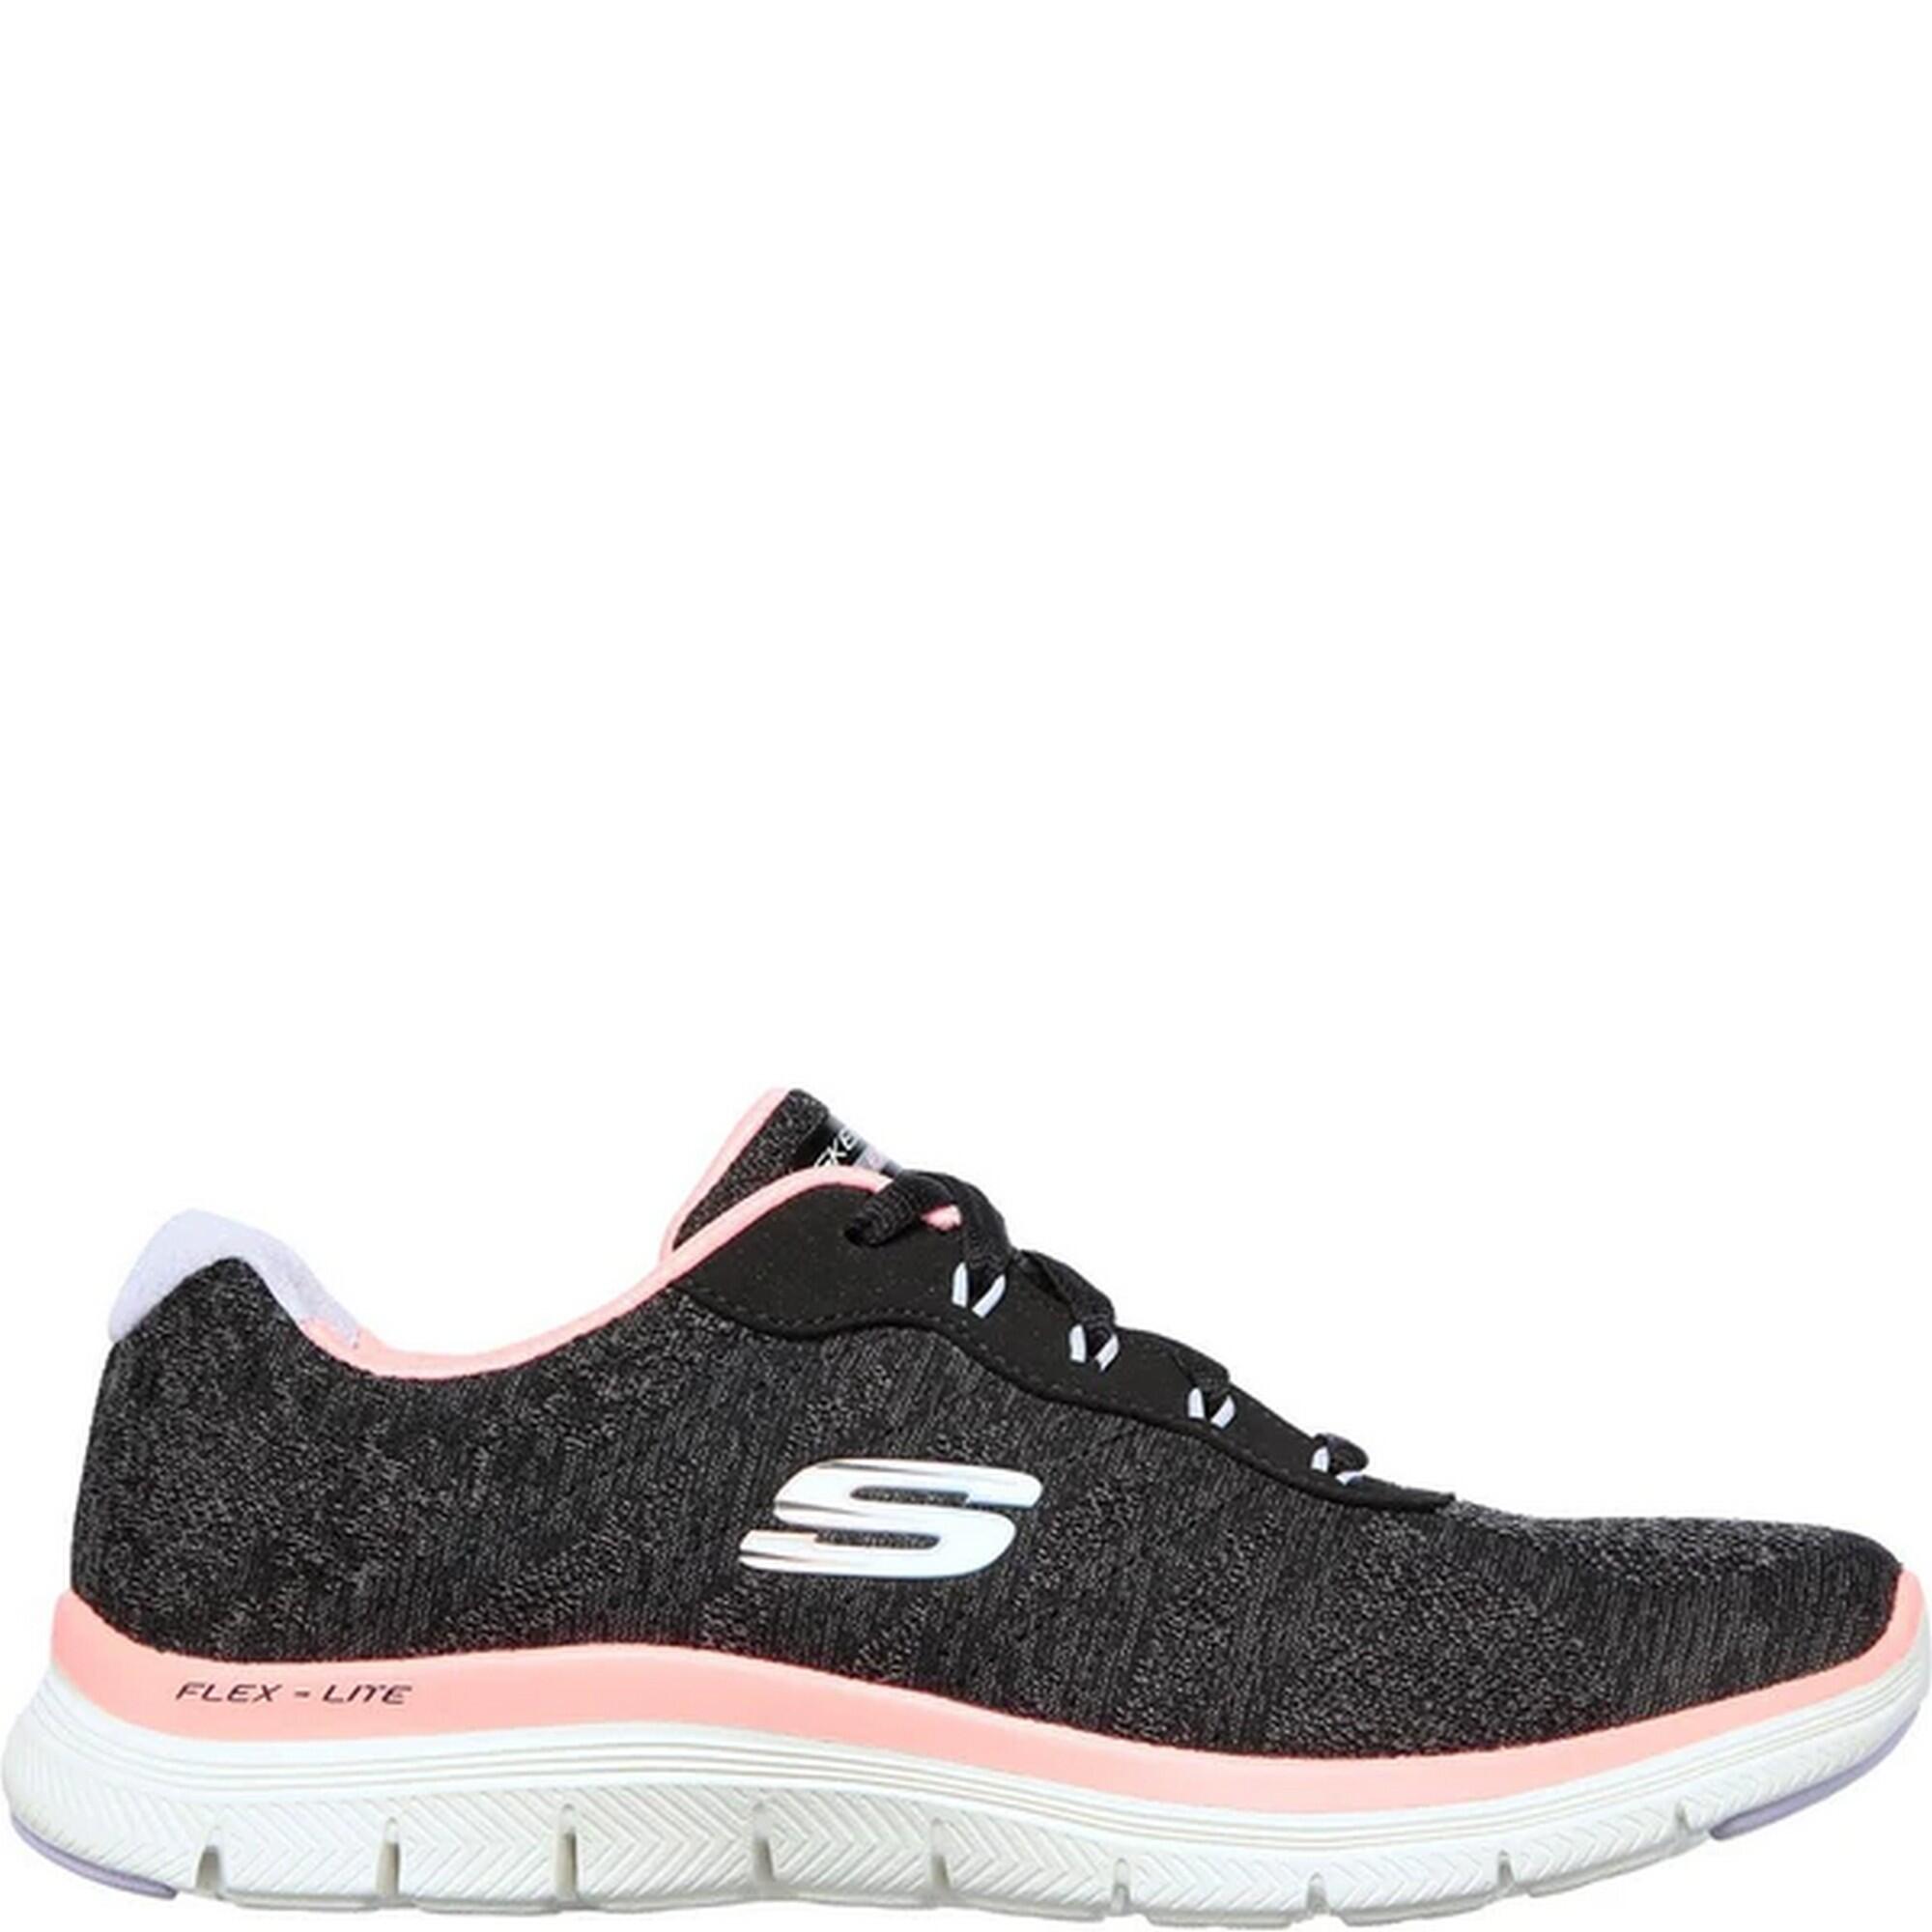 Womens/Ladies Appeal 4.0 Fresh Move Trainers (Black/Coral) 3/5